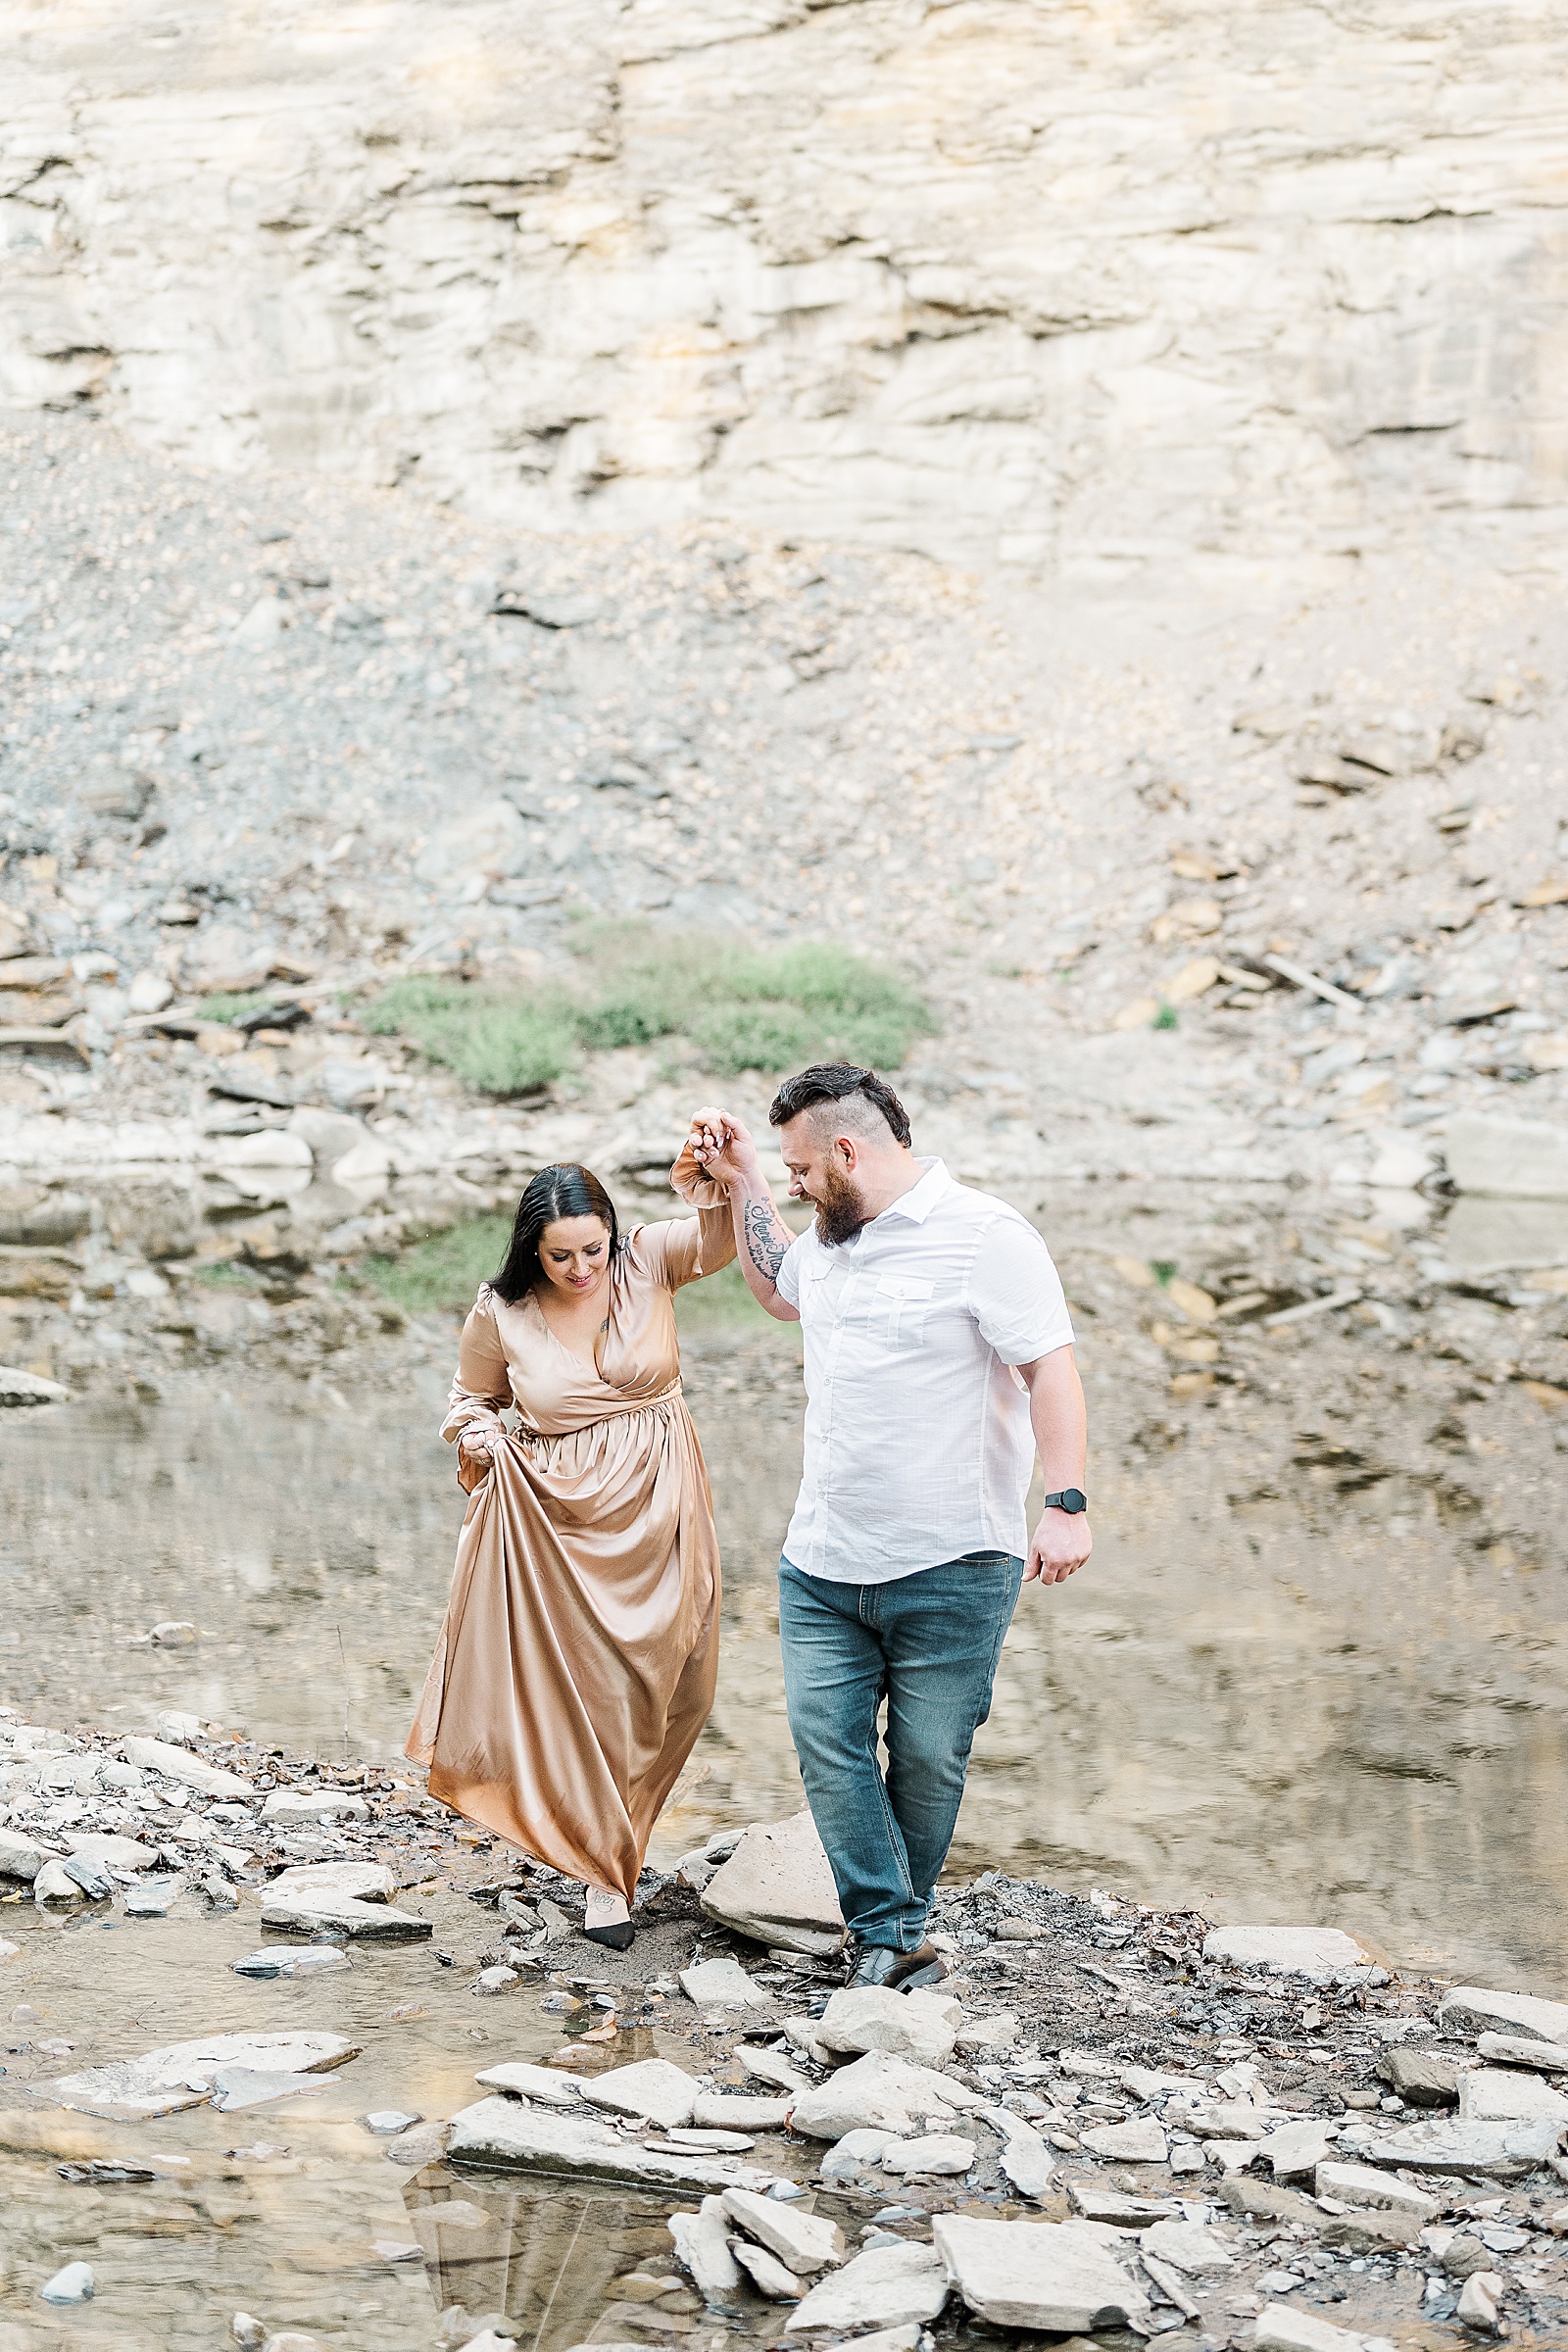 Canyon in Ohio Inspired Engagement-28.jpg